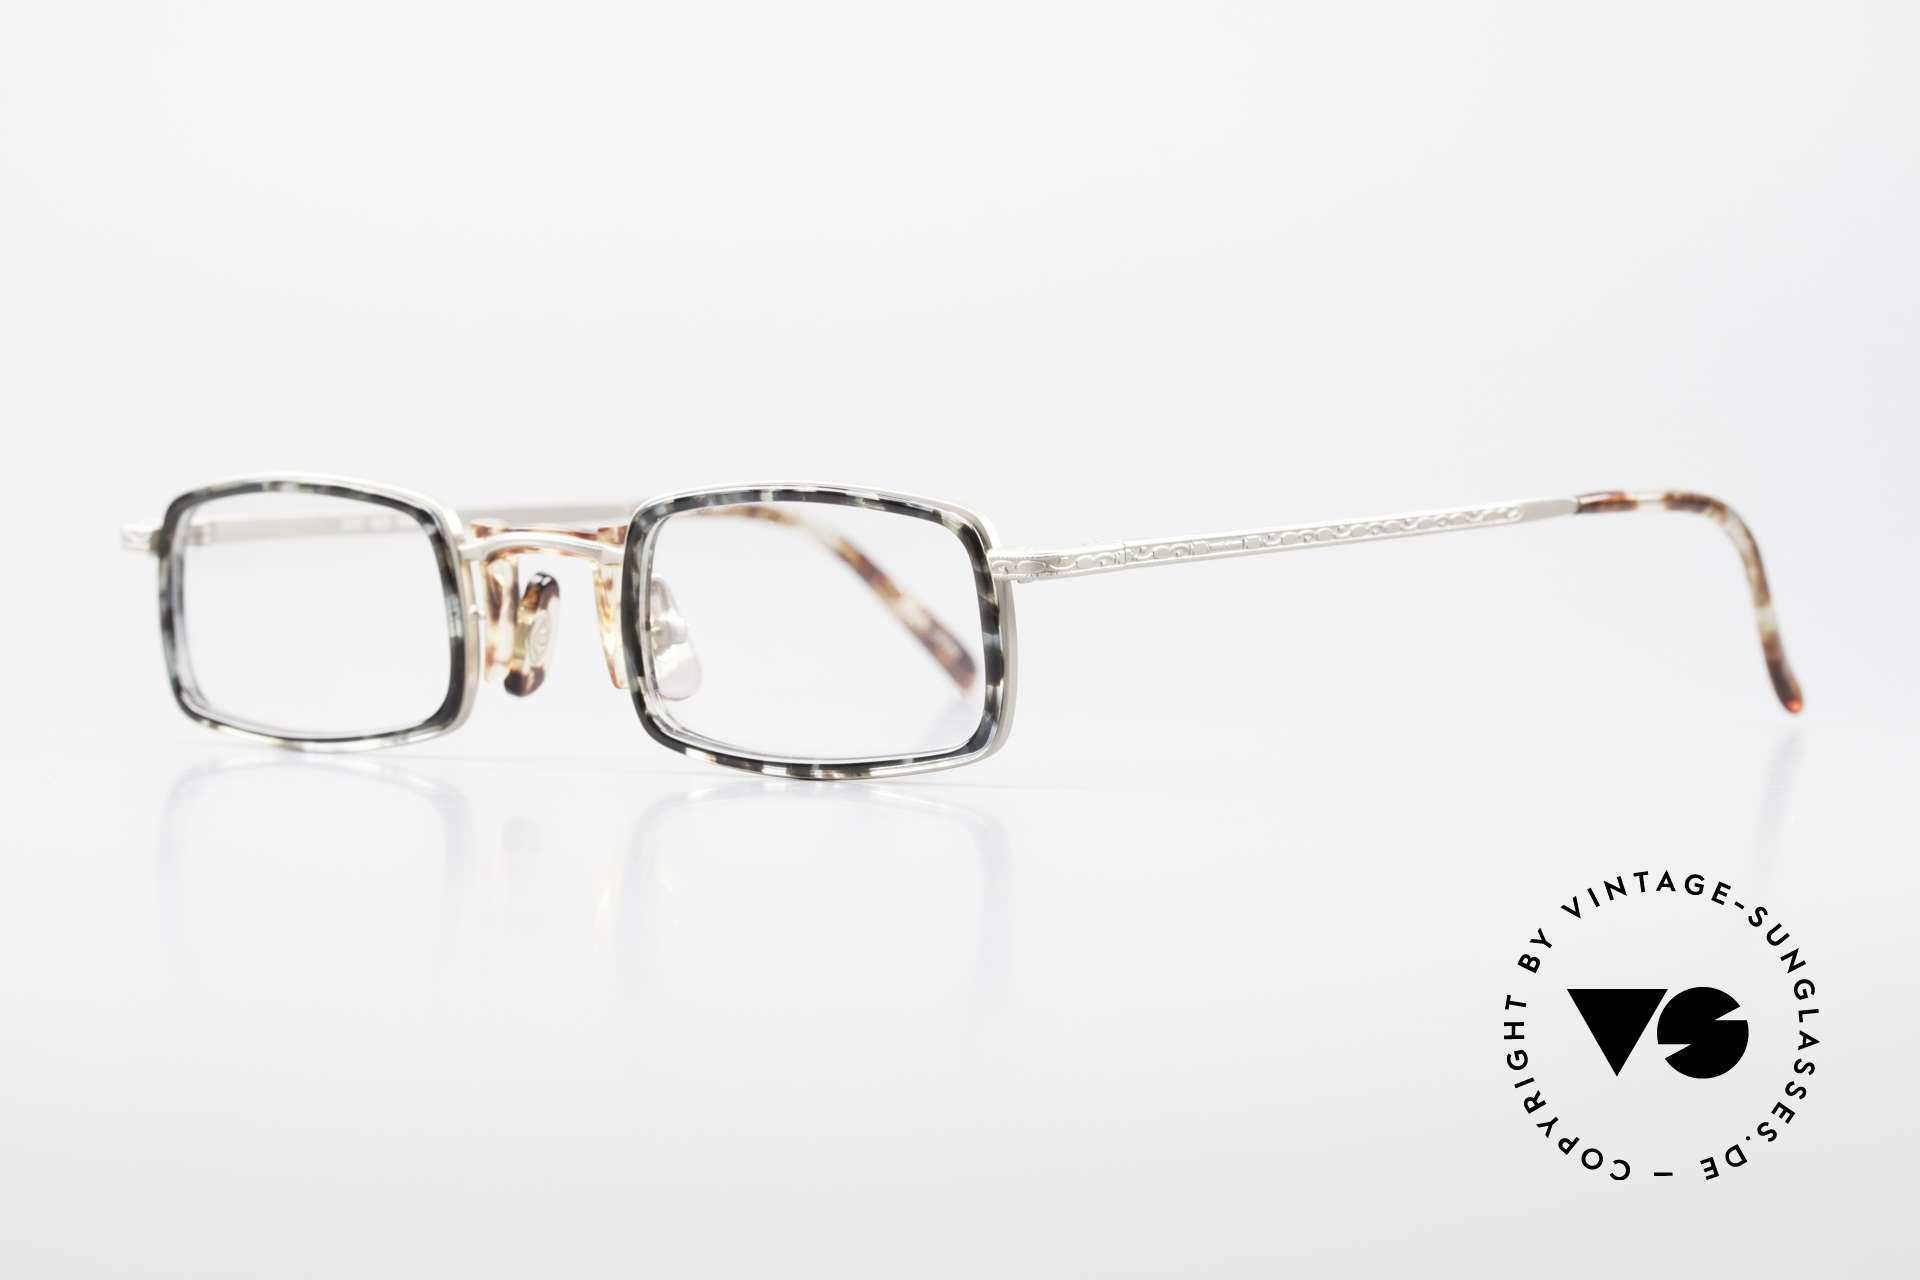 Freudenhaus Jedi Square 90's Designer Frame, great combination of materials (plastic and metal), Made for Men and Women